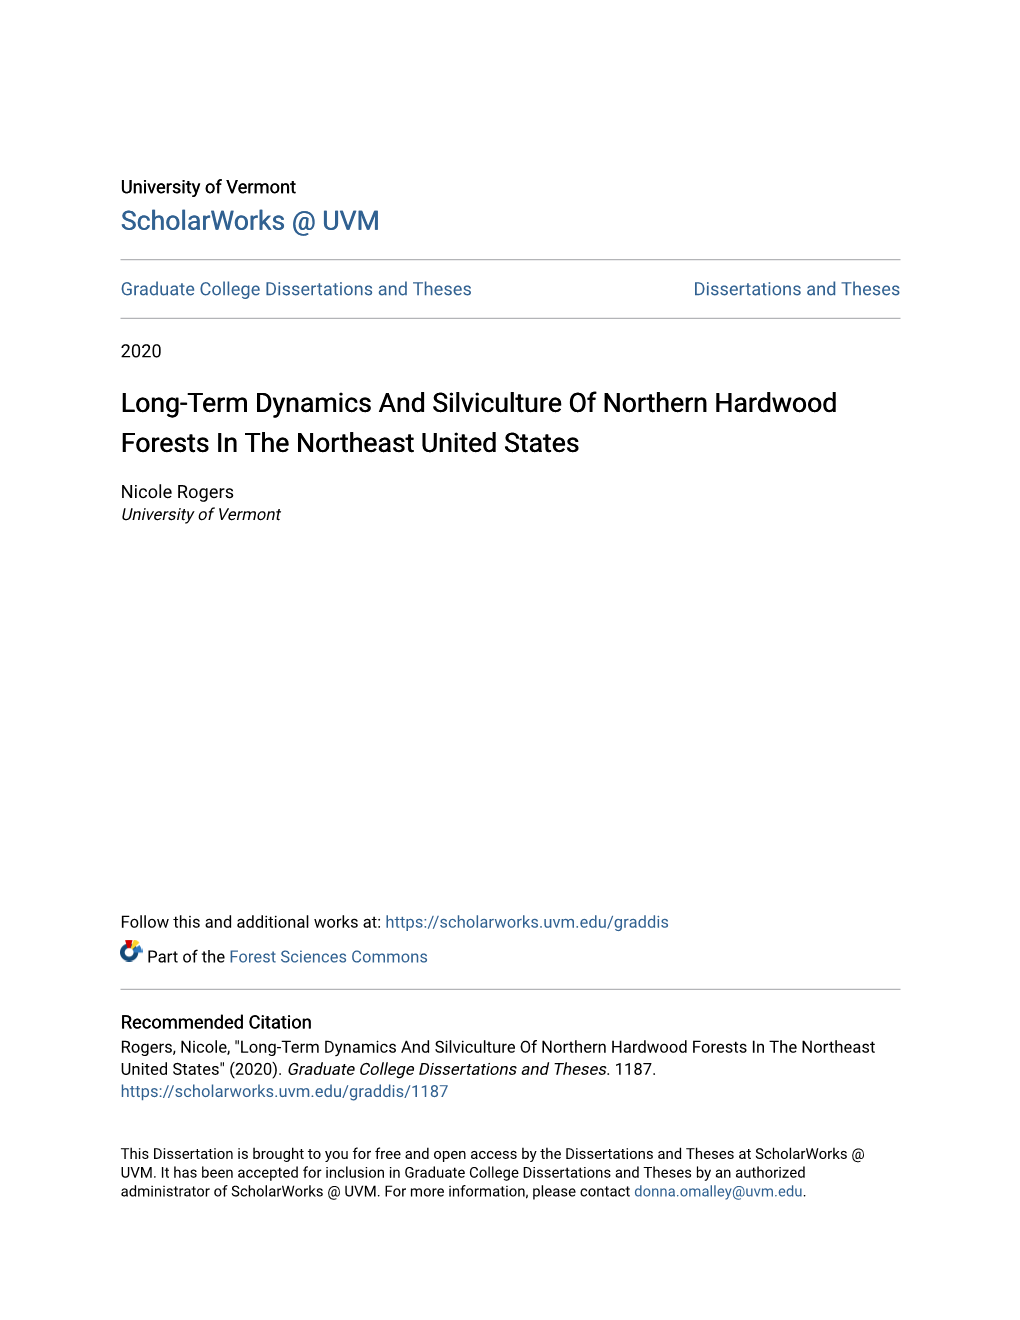 Long-Term Dynamics and Silviculture of Northern Hardwood Forests in the Northeast United States